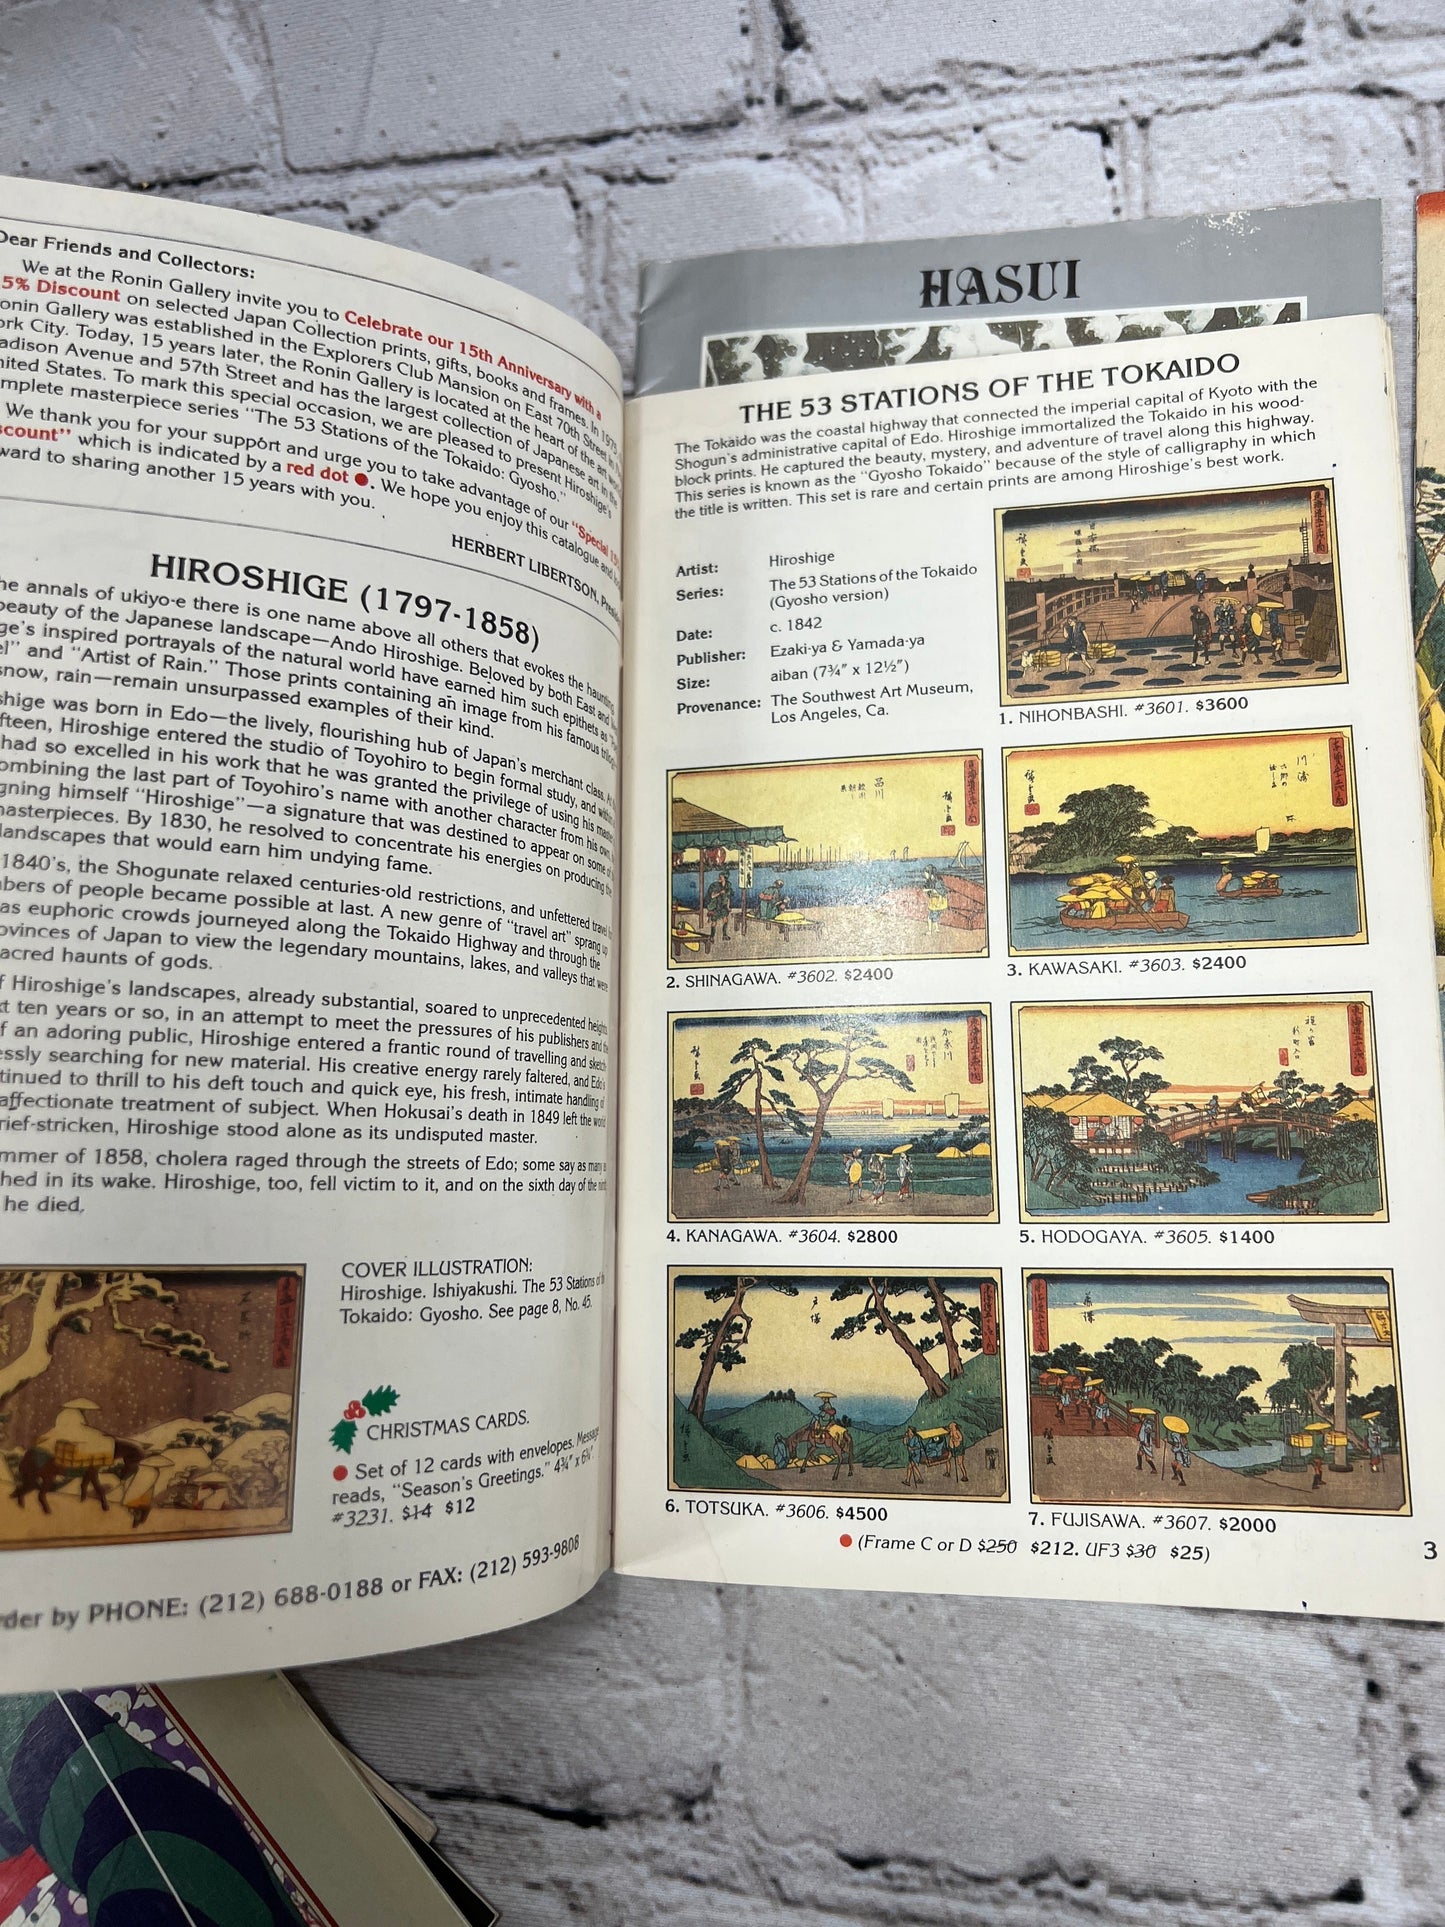 Ronin Gallery: Japan Collection [Auction Catalogs · Lot of 15 · 1990s - 2000s]